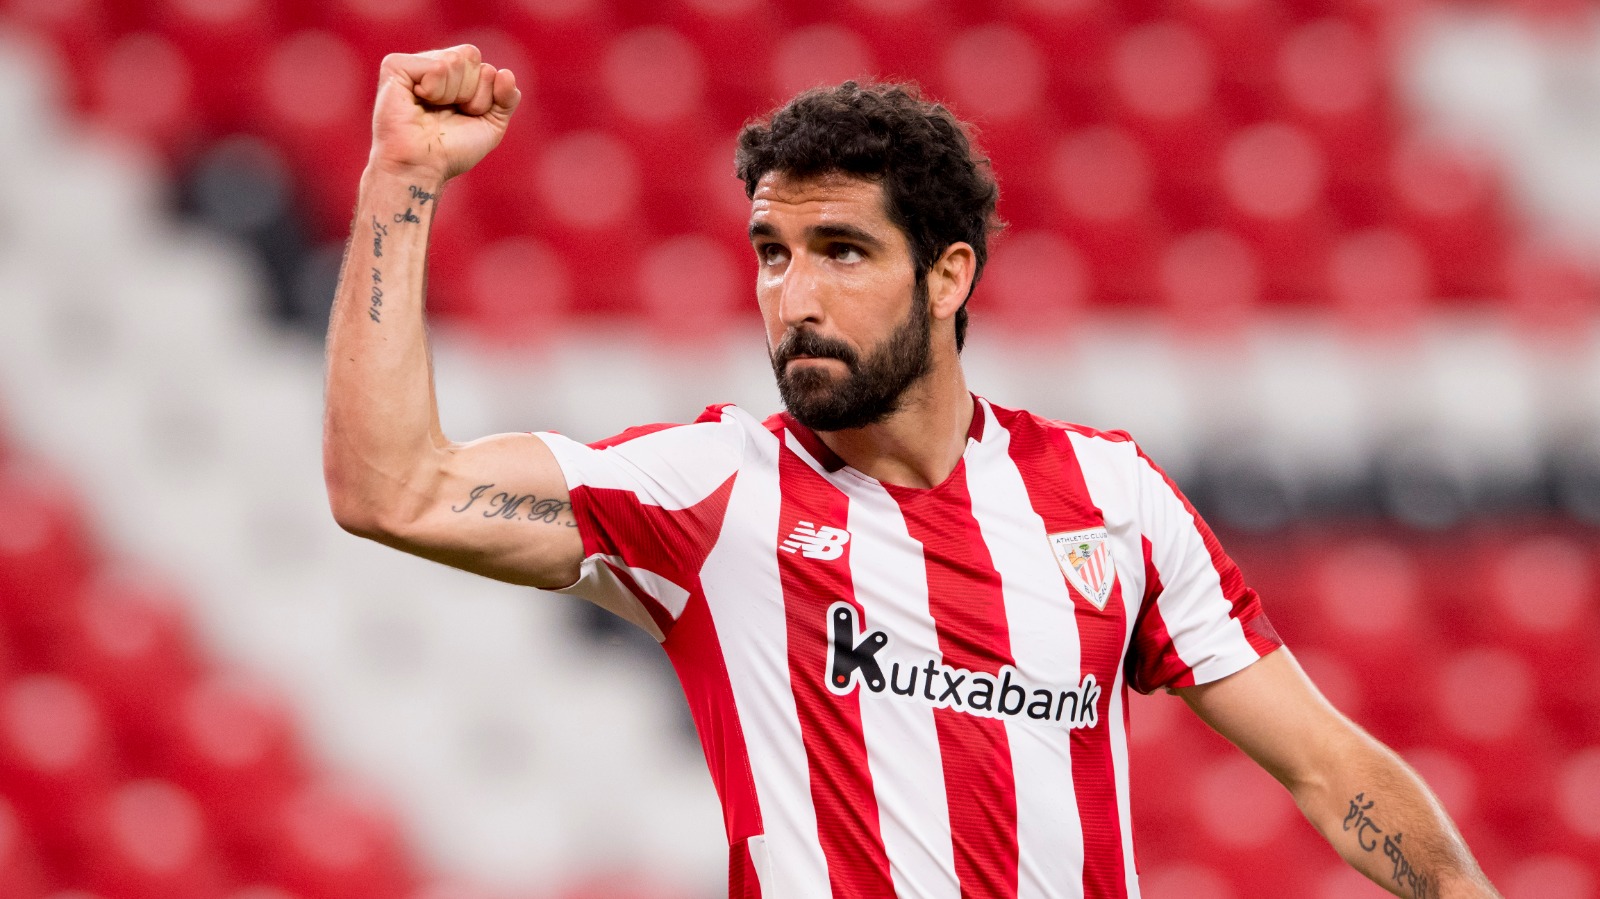 Athletic Bilbao and Real Valladolid play out thrilling 2-2 draw at San Mames - Football España